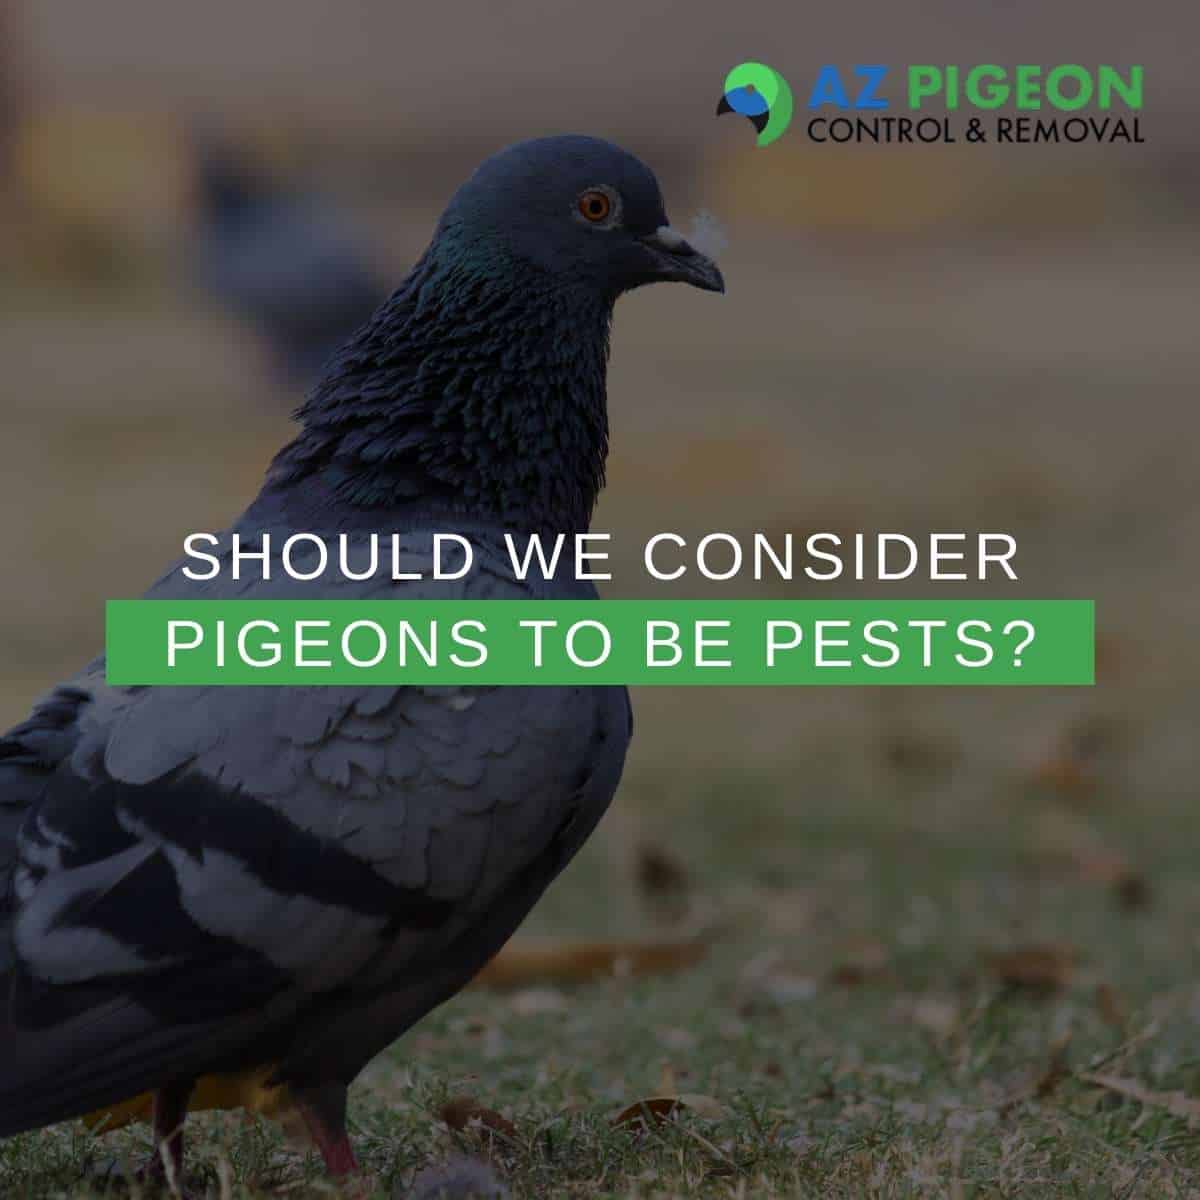 Should We Consider Pigeons To Be Pests?